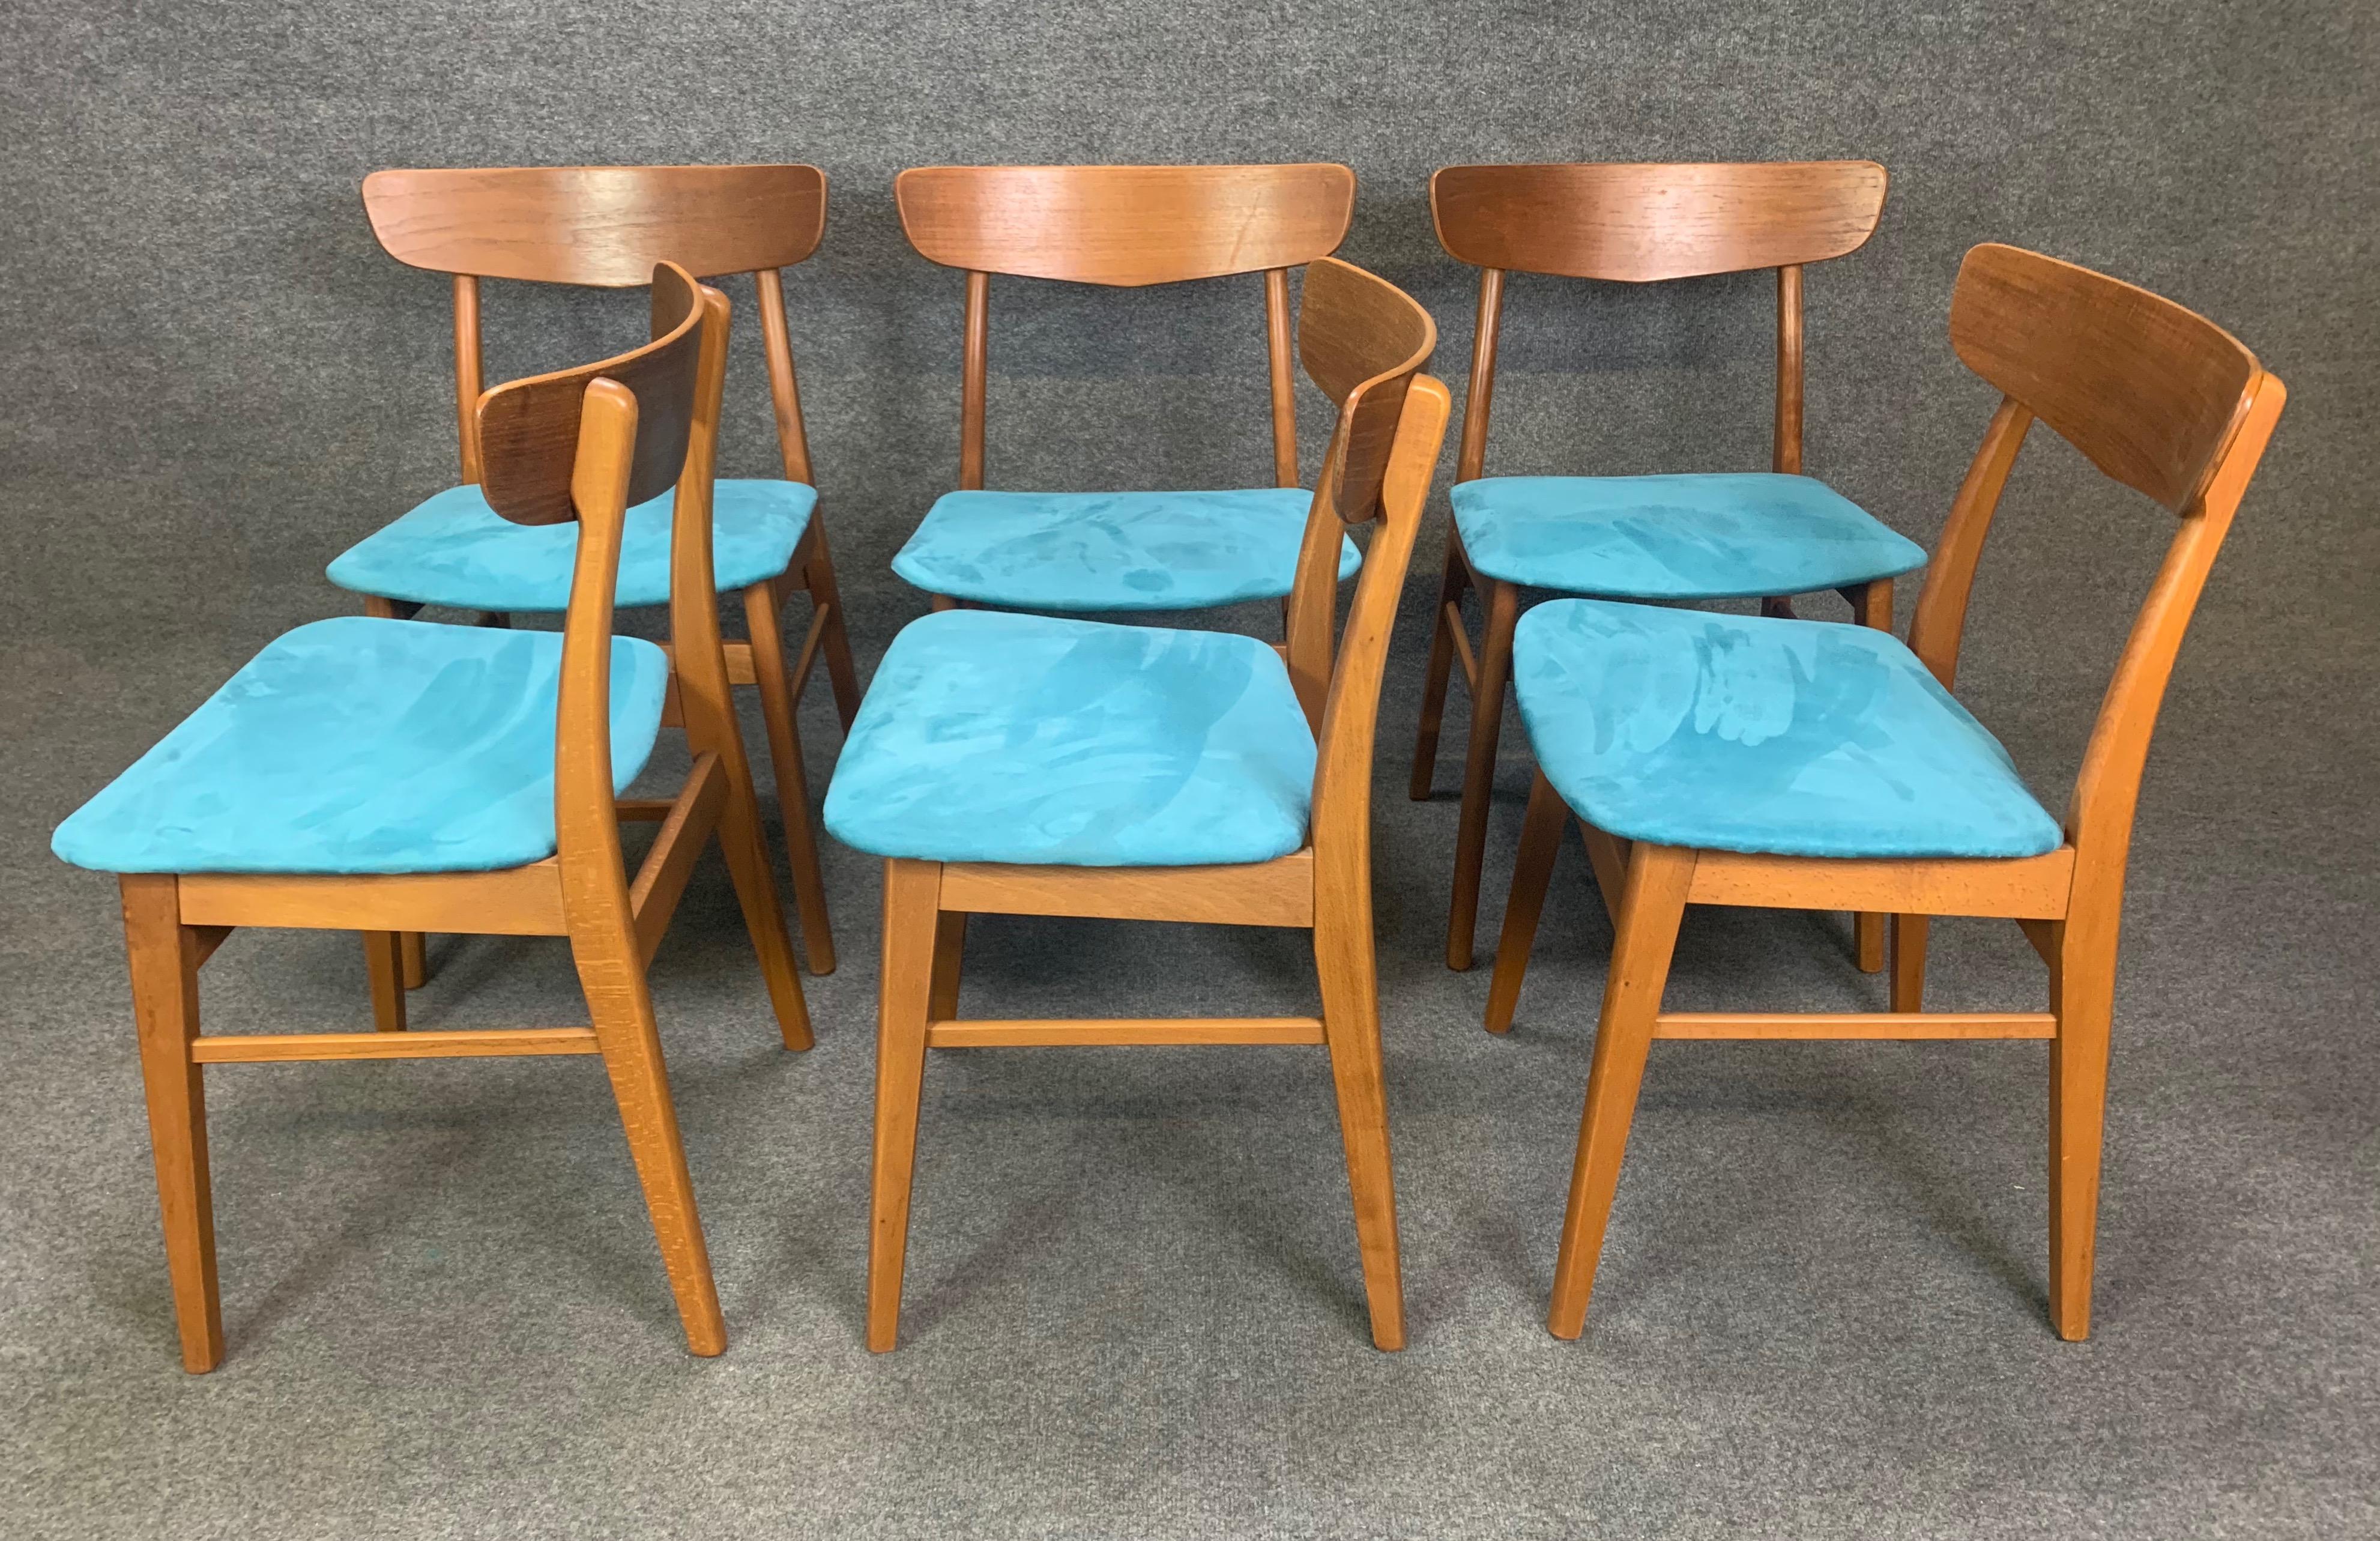 Set of Six Vintage Midcentury Danish Modern Teak Dining Chairs by Findhahls In Good Condition For Sale In San Marcos, CA